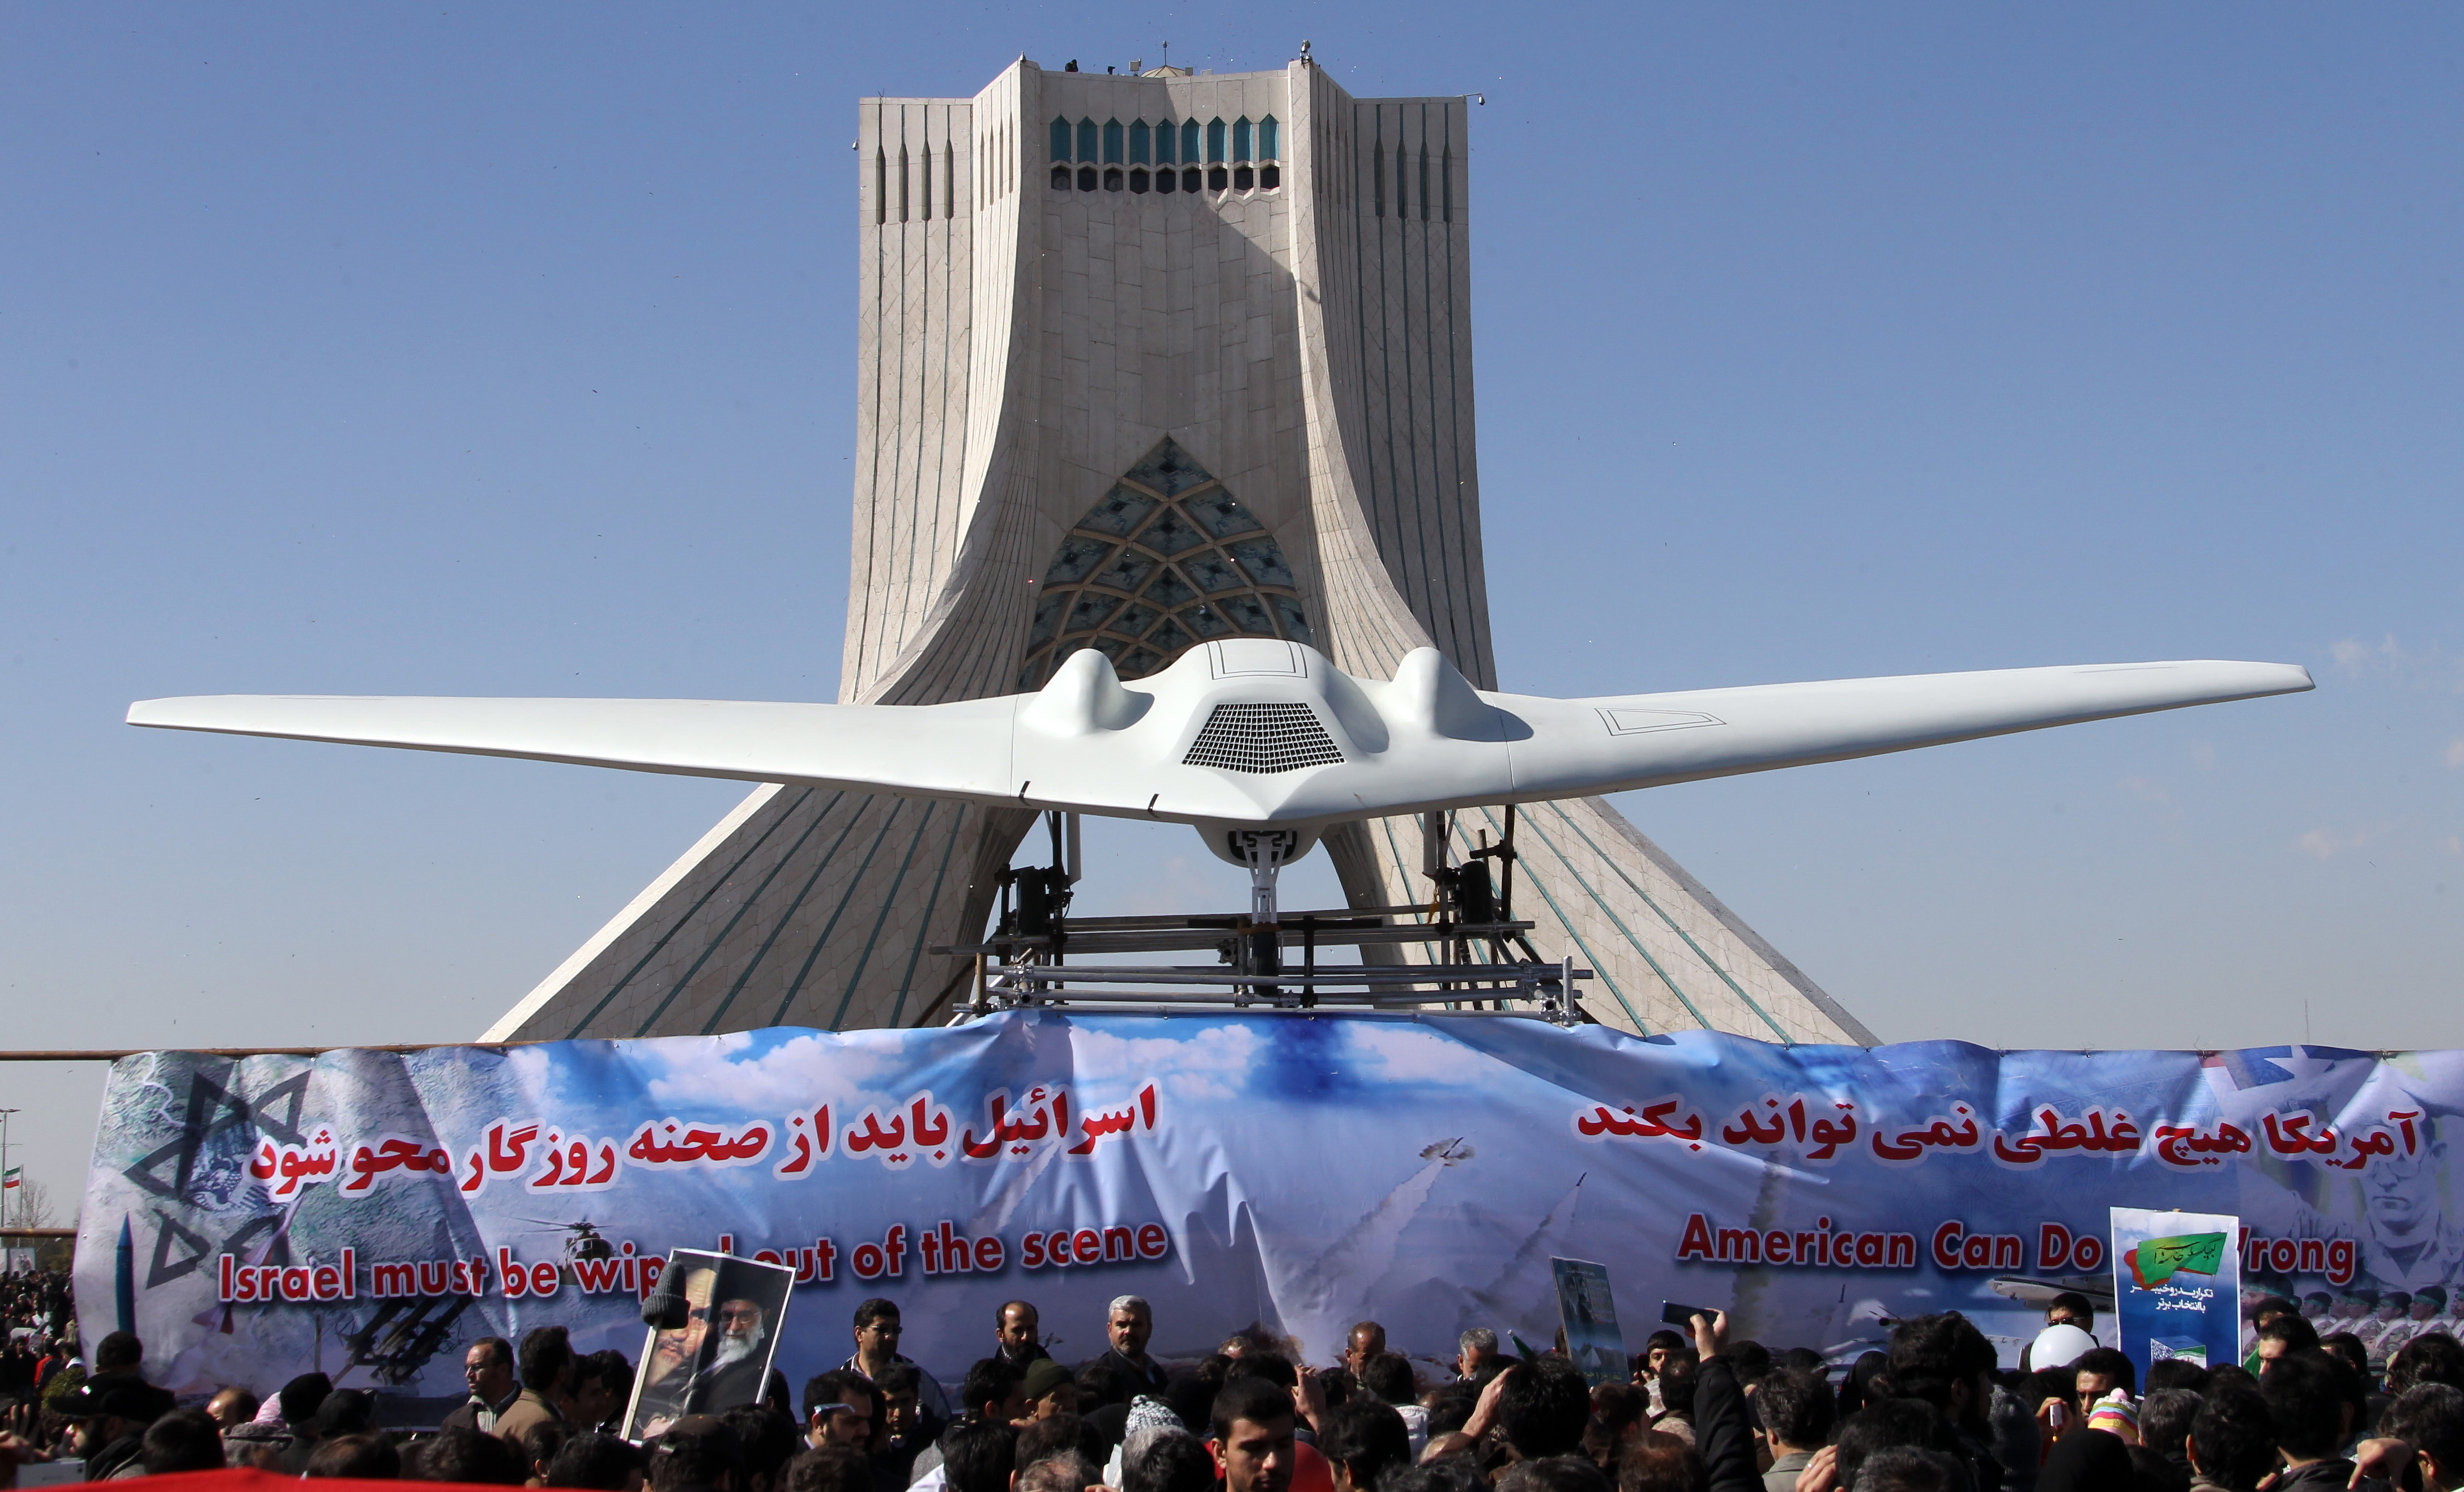 Iranians walk past a replica of the captured US RQ-170 drone which is on display next to the Azadi (Freedom) tower during the 33rd anniversary of the Islamic revolution in Tehran on February 11, 2012. (Atta Kenare&mdash;AFP/Getty Images)